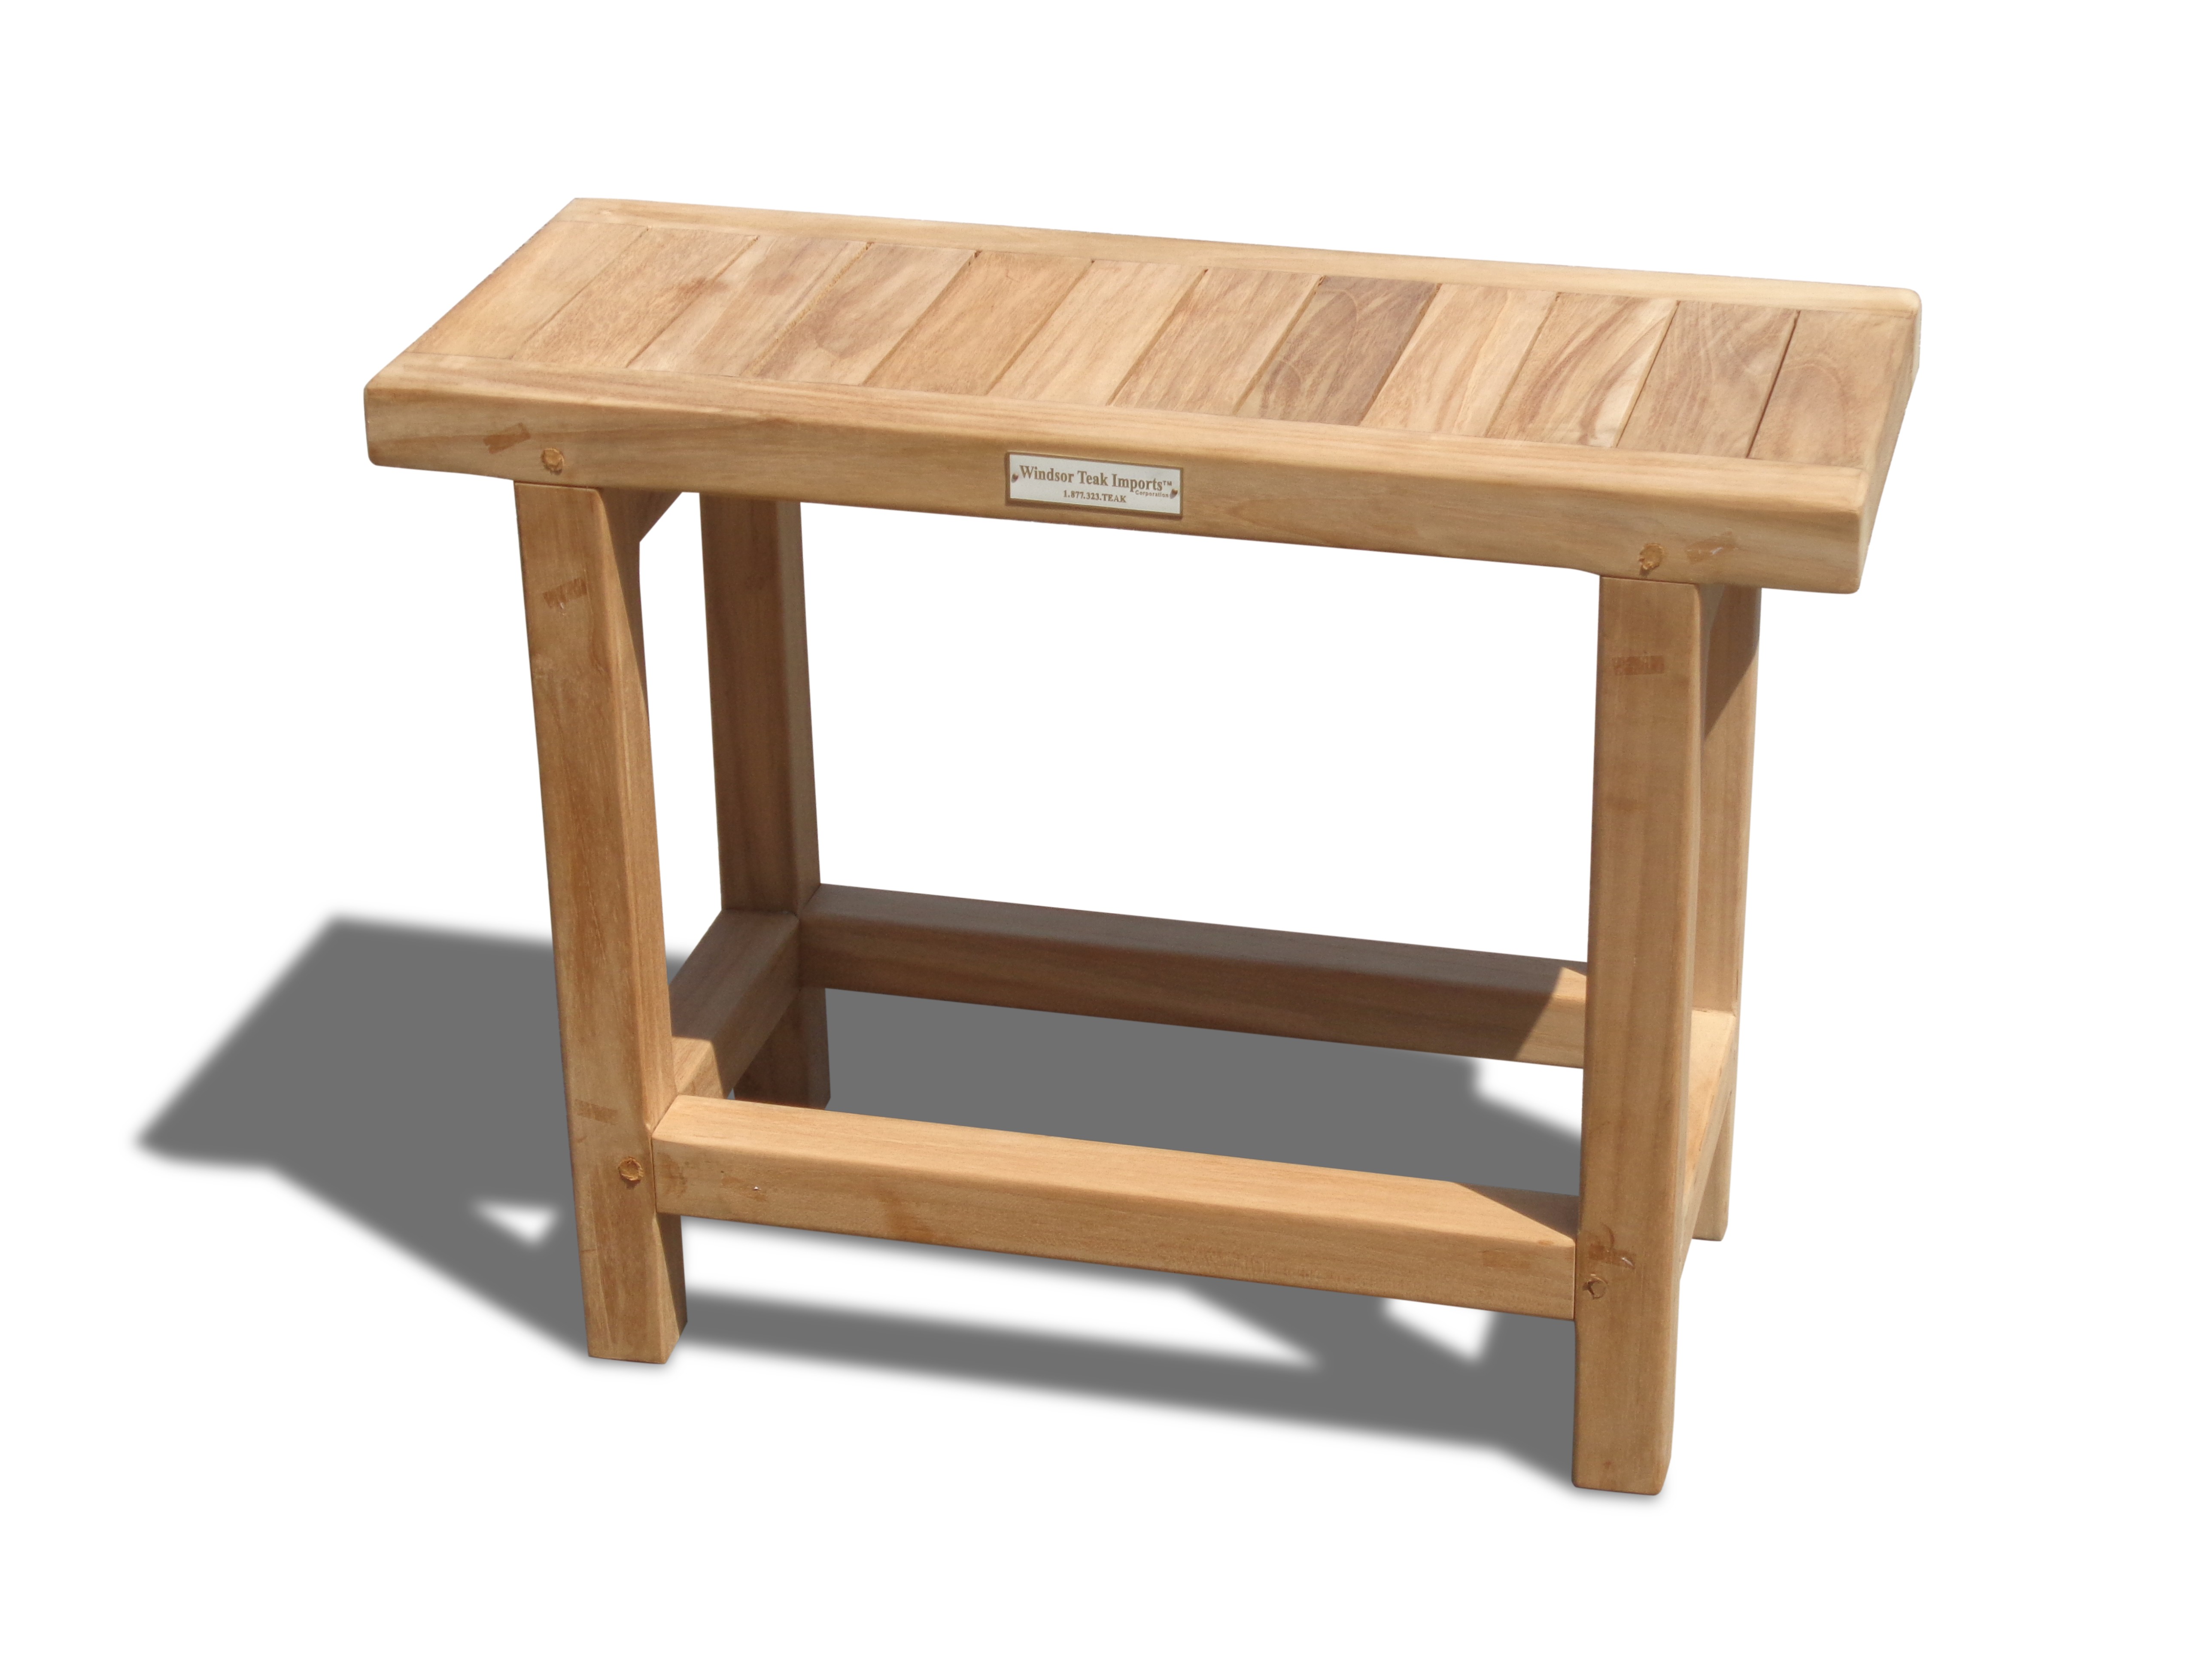 The 10" x 24" Fenwick Teak Side Table/ Shower Bench....take your pick!